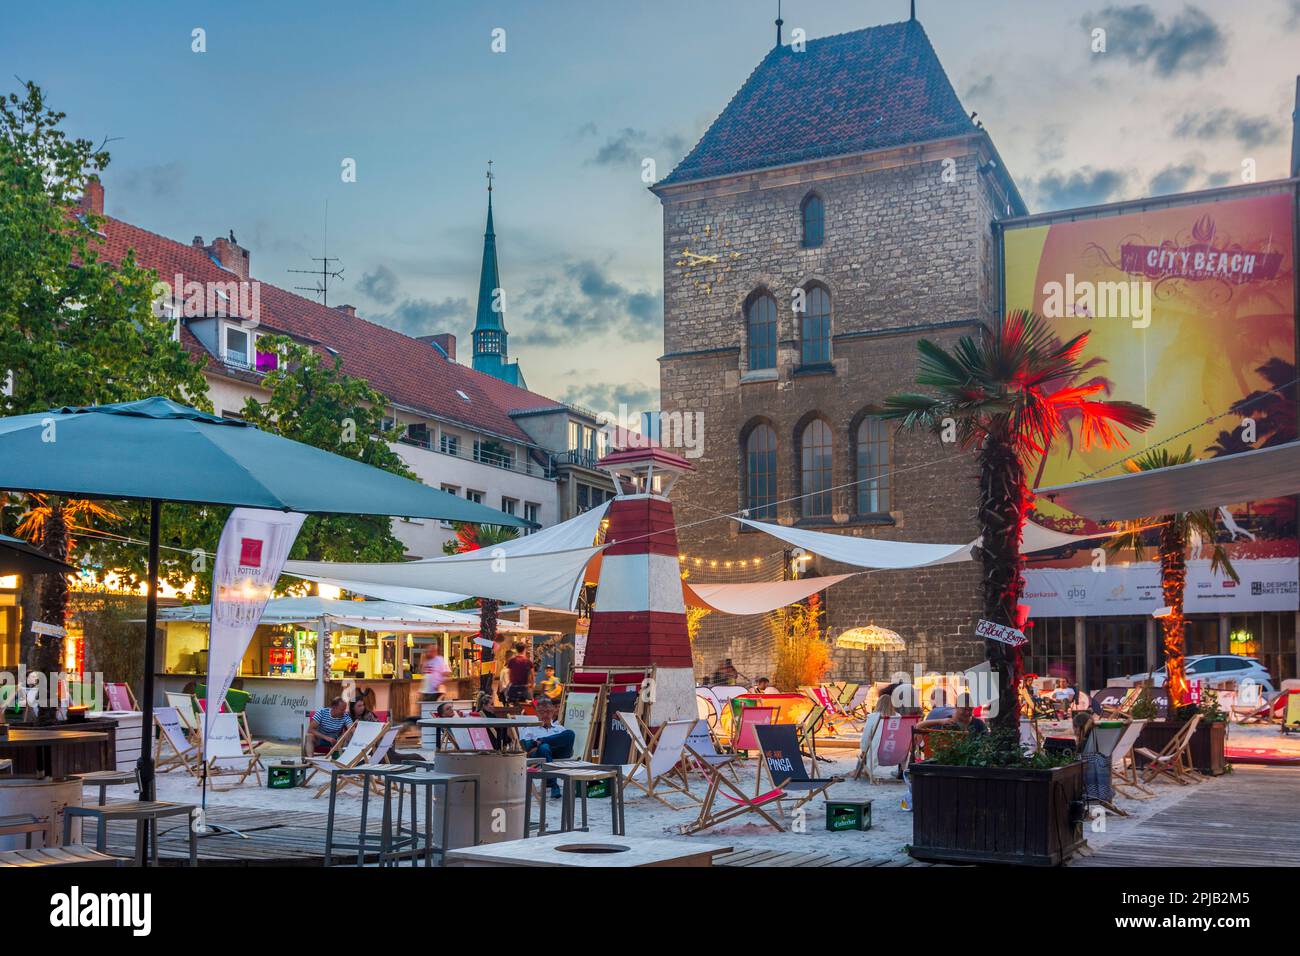 Hildesheim: square 'An der Lilie', Town Hall back side, city beach bar in Region Hannover, Niedersachsen, Lower Saxony, Germany Stock Photo